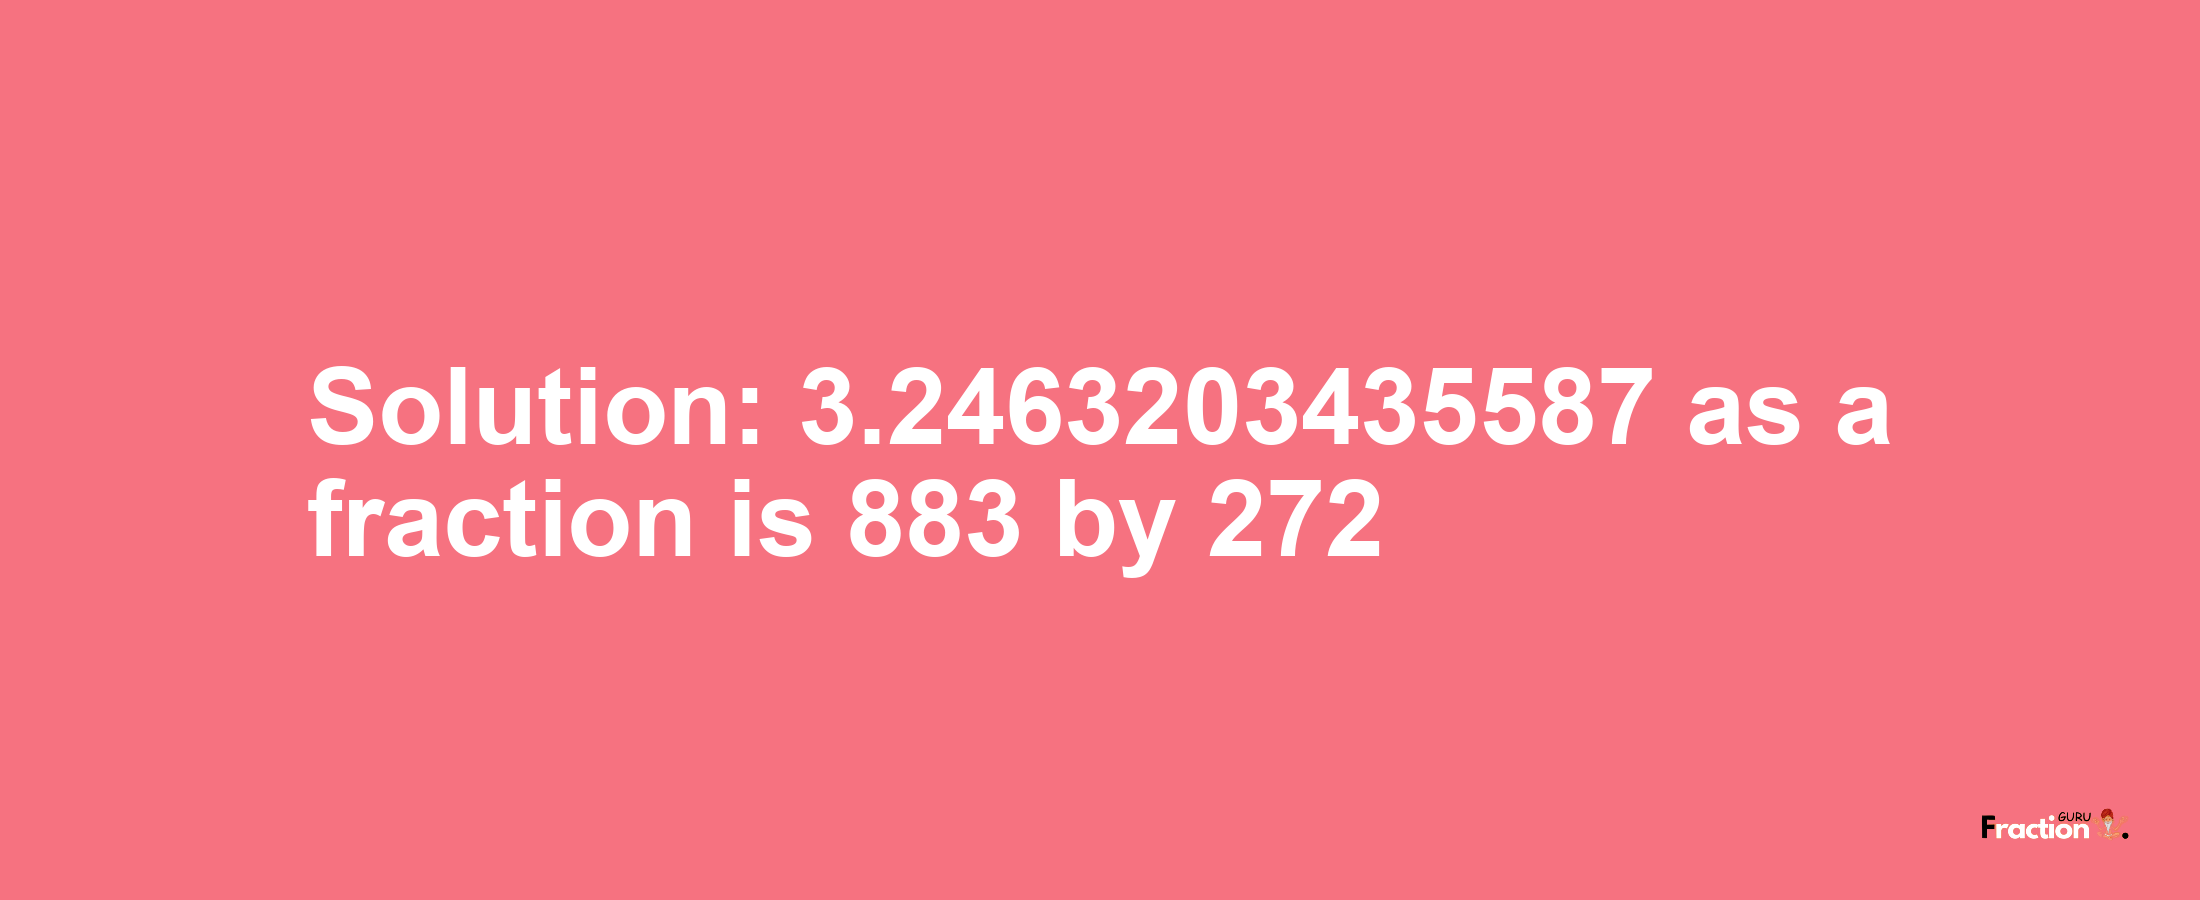 Solution:3.2463203435587 as a fraction is 883/272